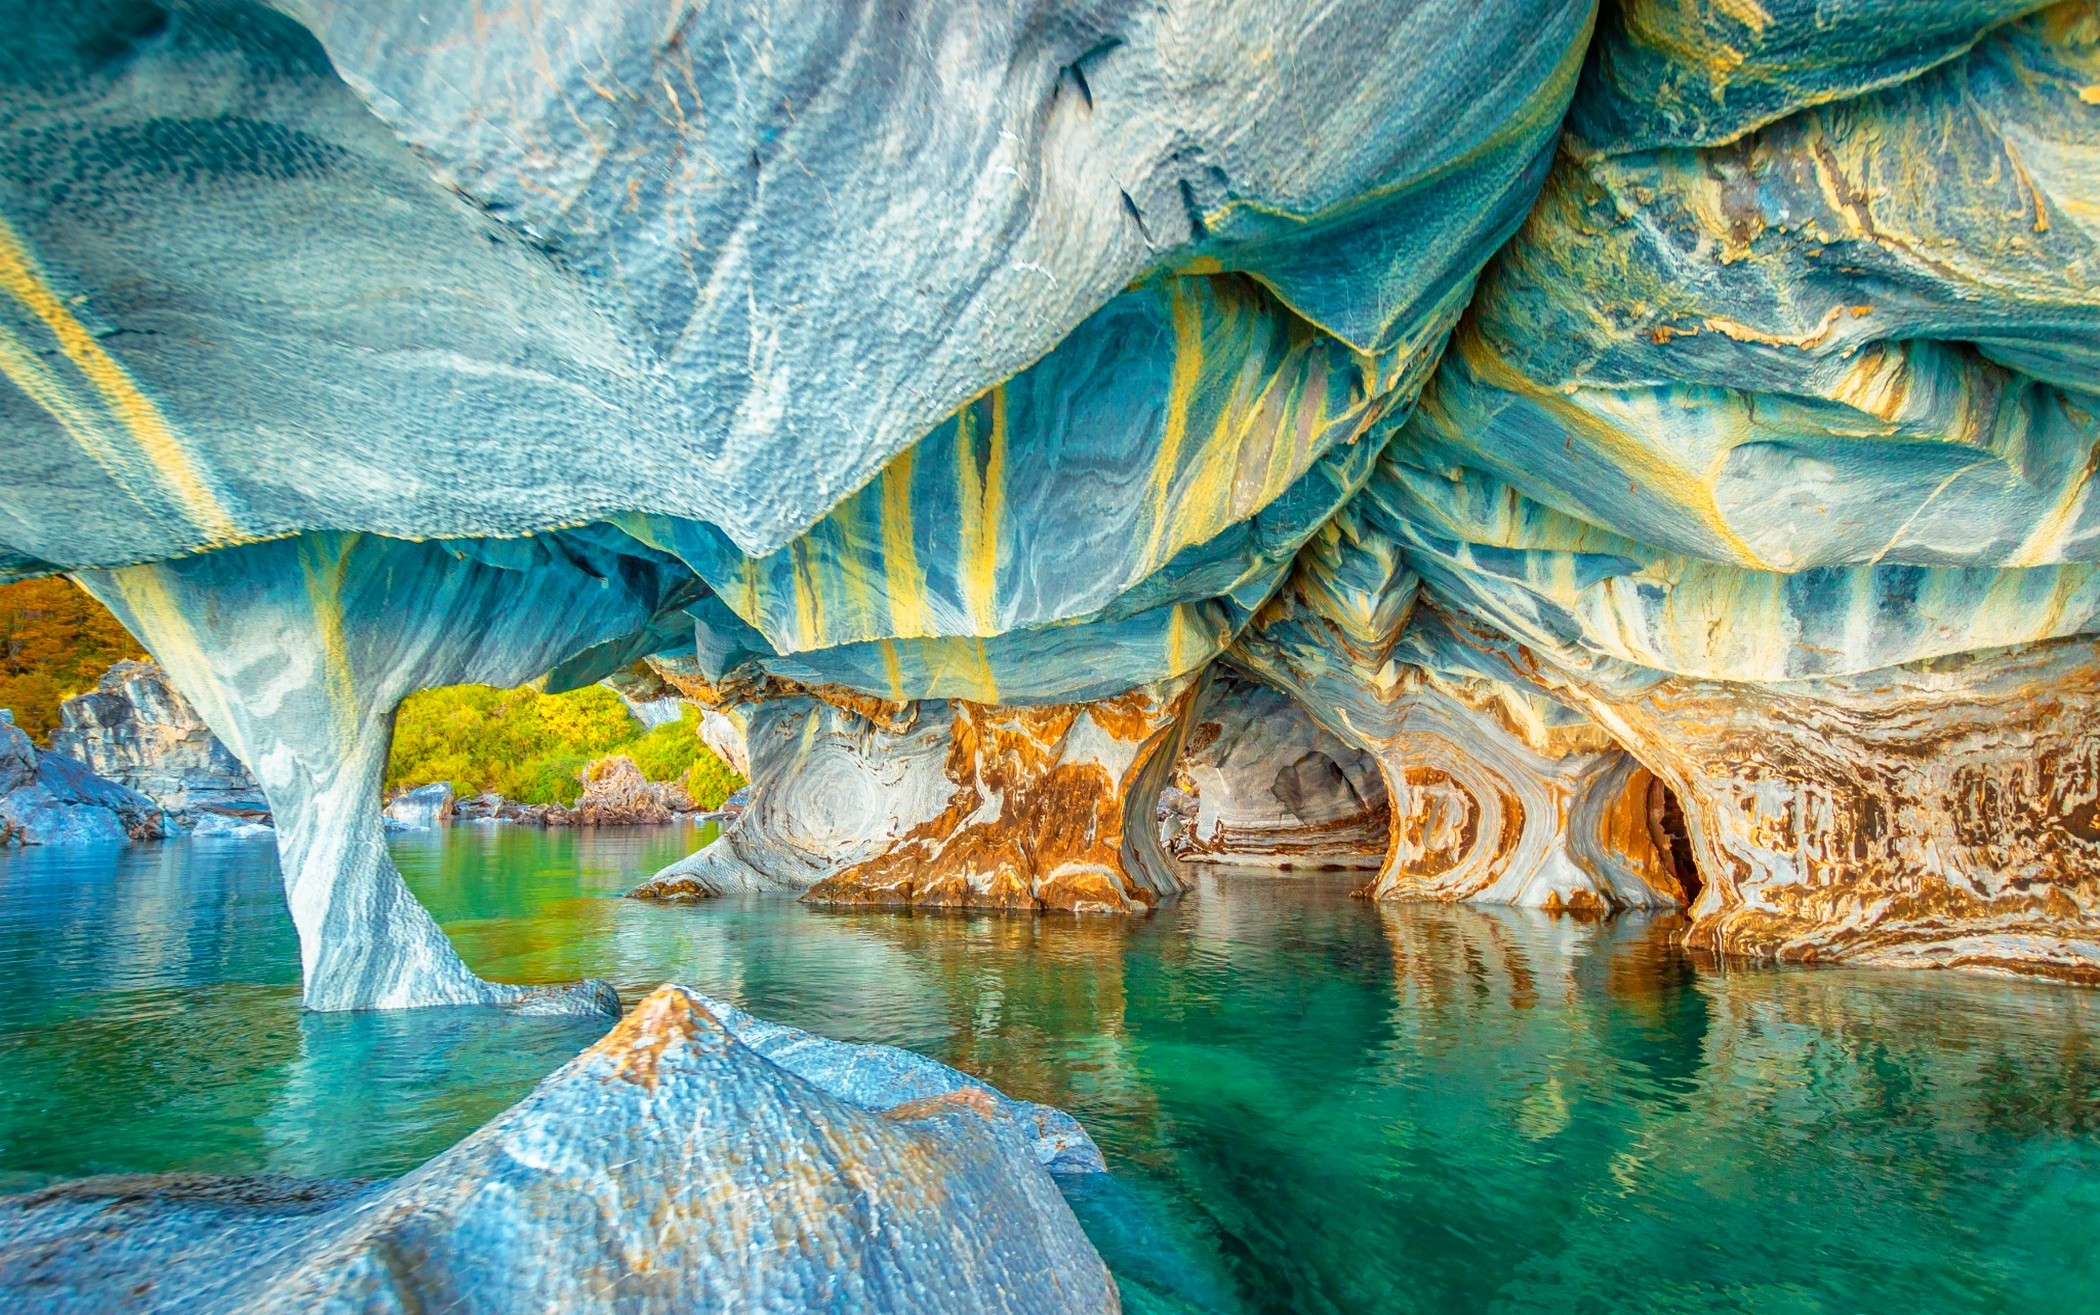 General 2100x1315 nature cave Chile colorful water erosion rocks rock formation South America